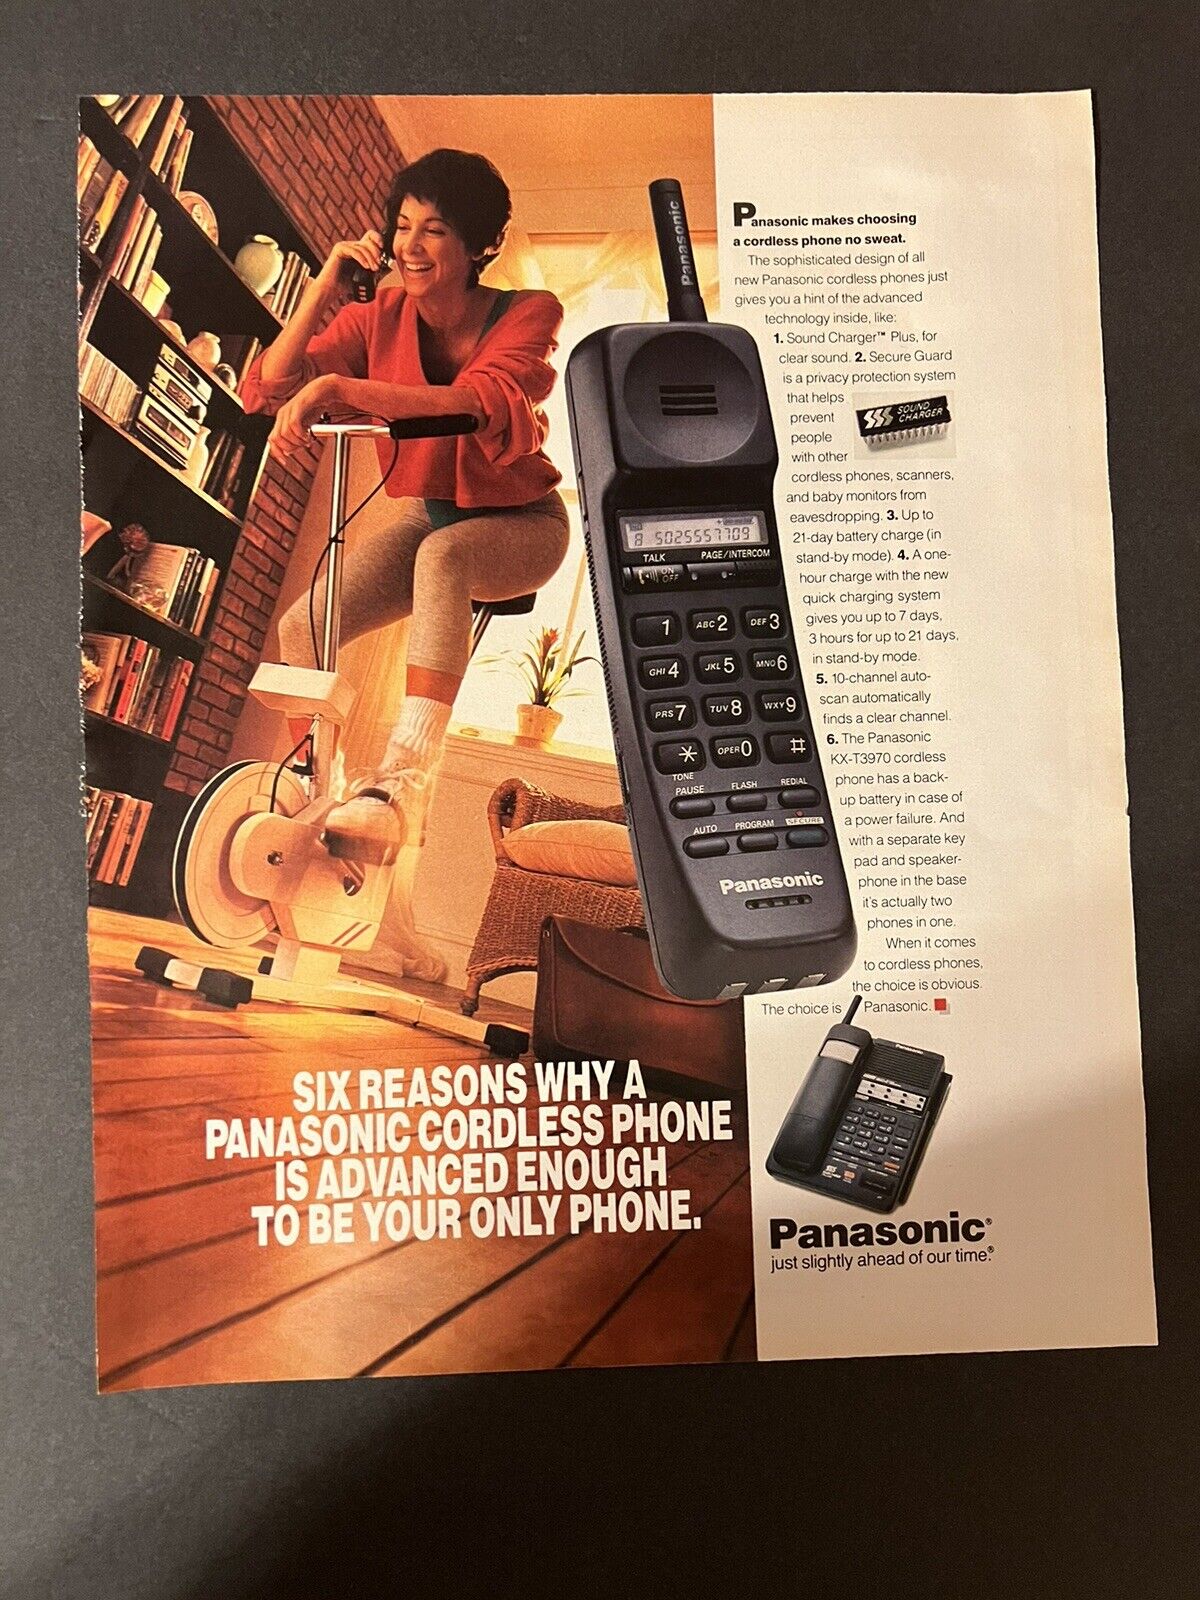 Vtg 1990s Panasonic Cordless Phone Ad, Just Slightly Ahead of our Time